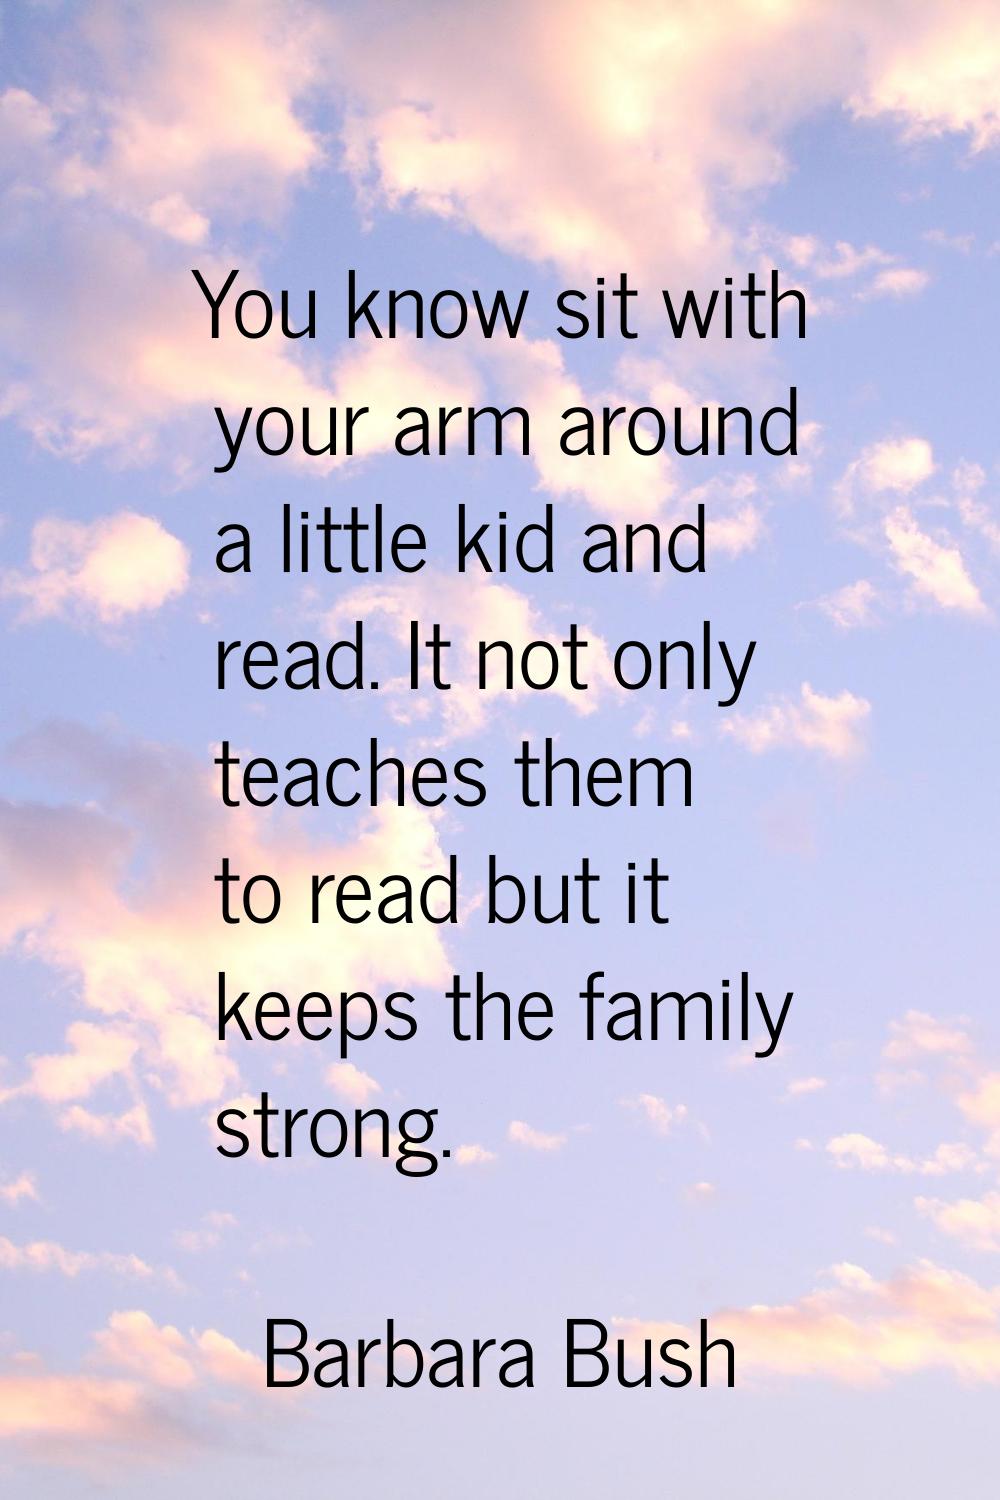 You know sit with your arm around a little kid and read. It not only teaches them to read but it ke